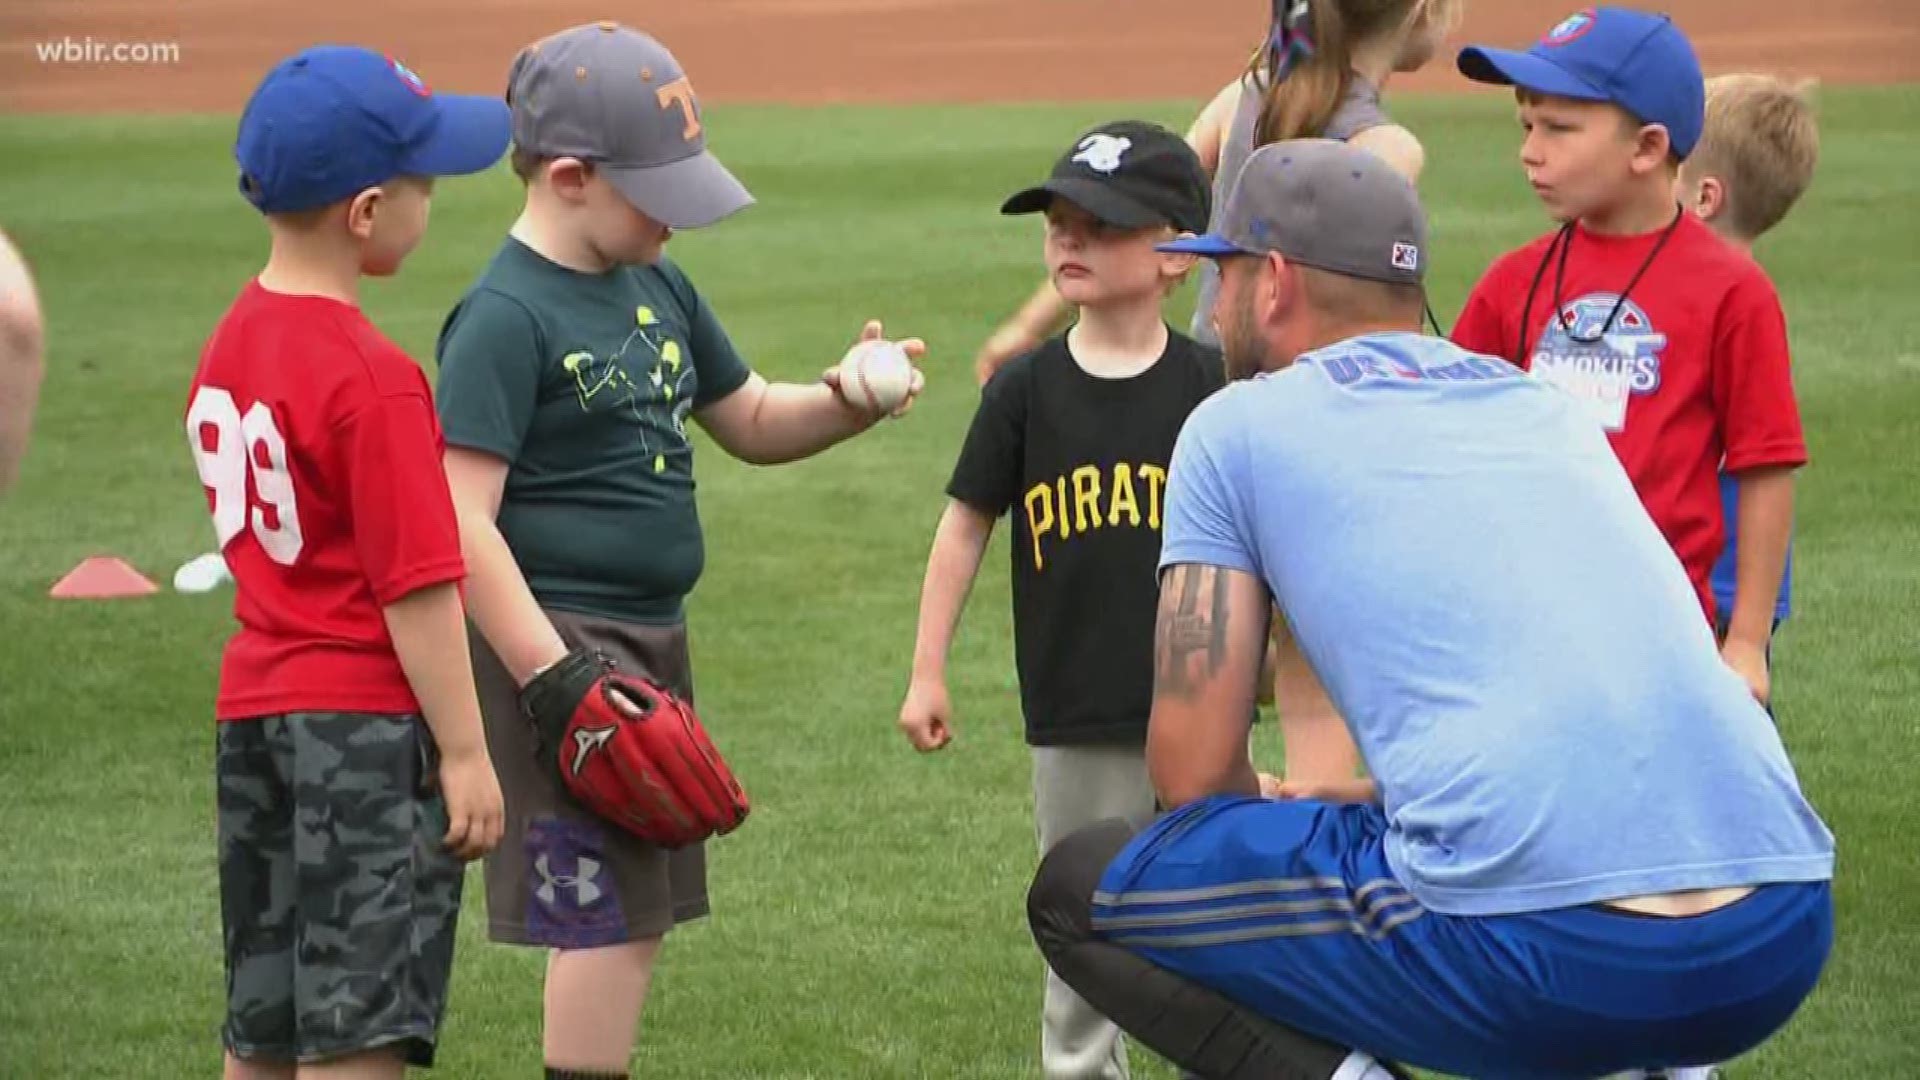 Tennessee Smokies baseball players taught kids the fundamentals before their game Sunday.